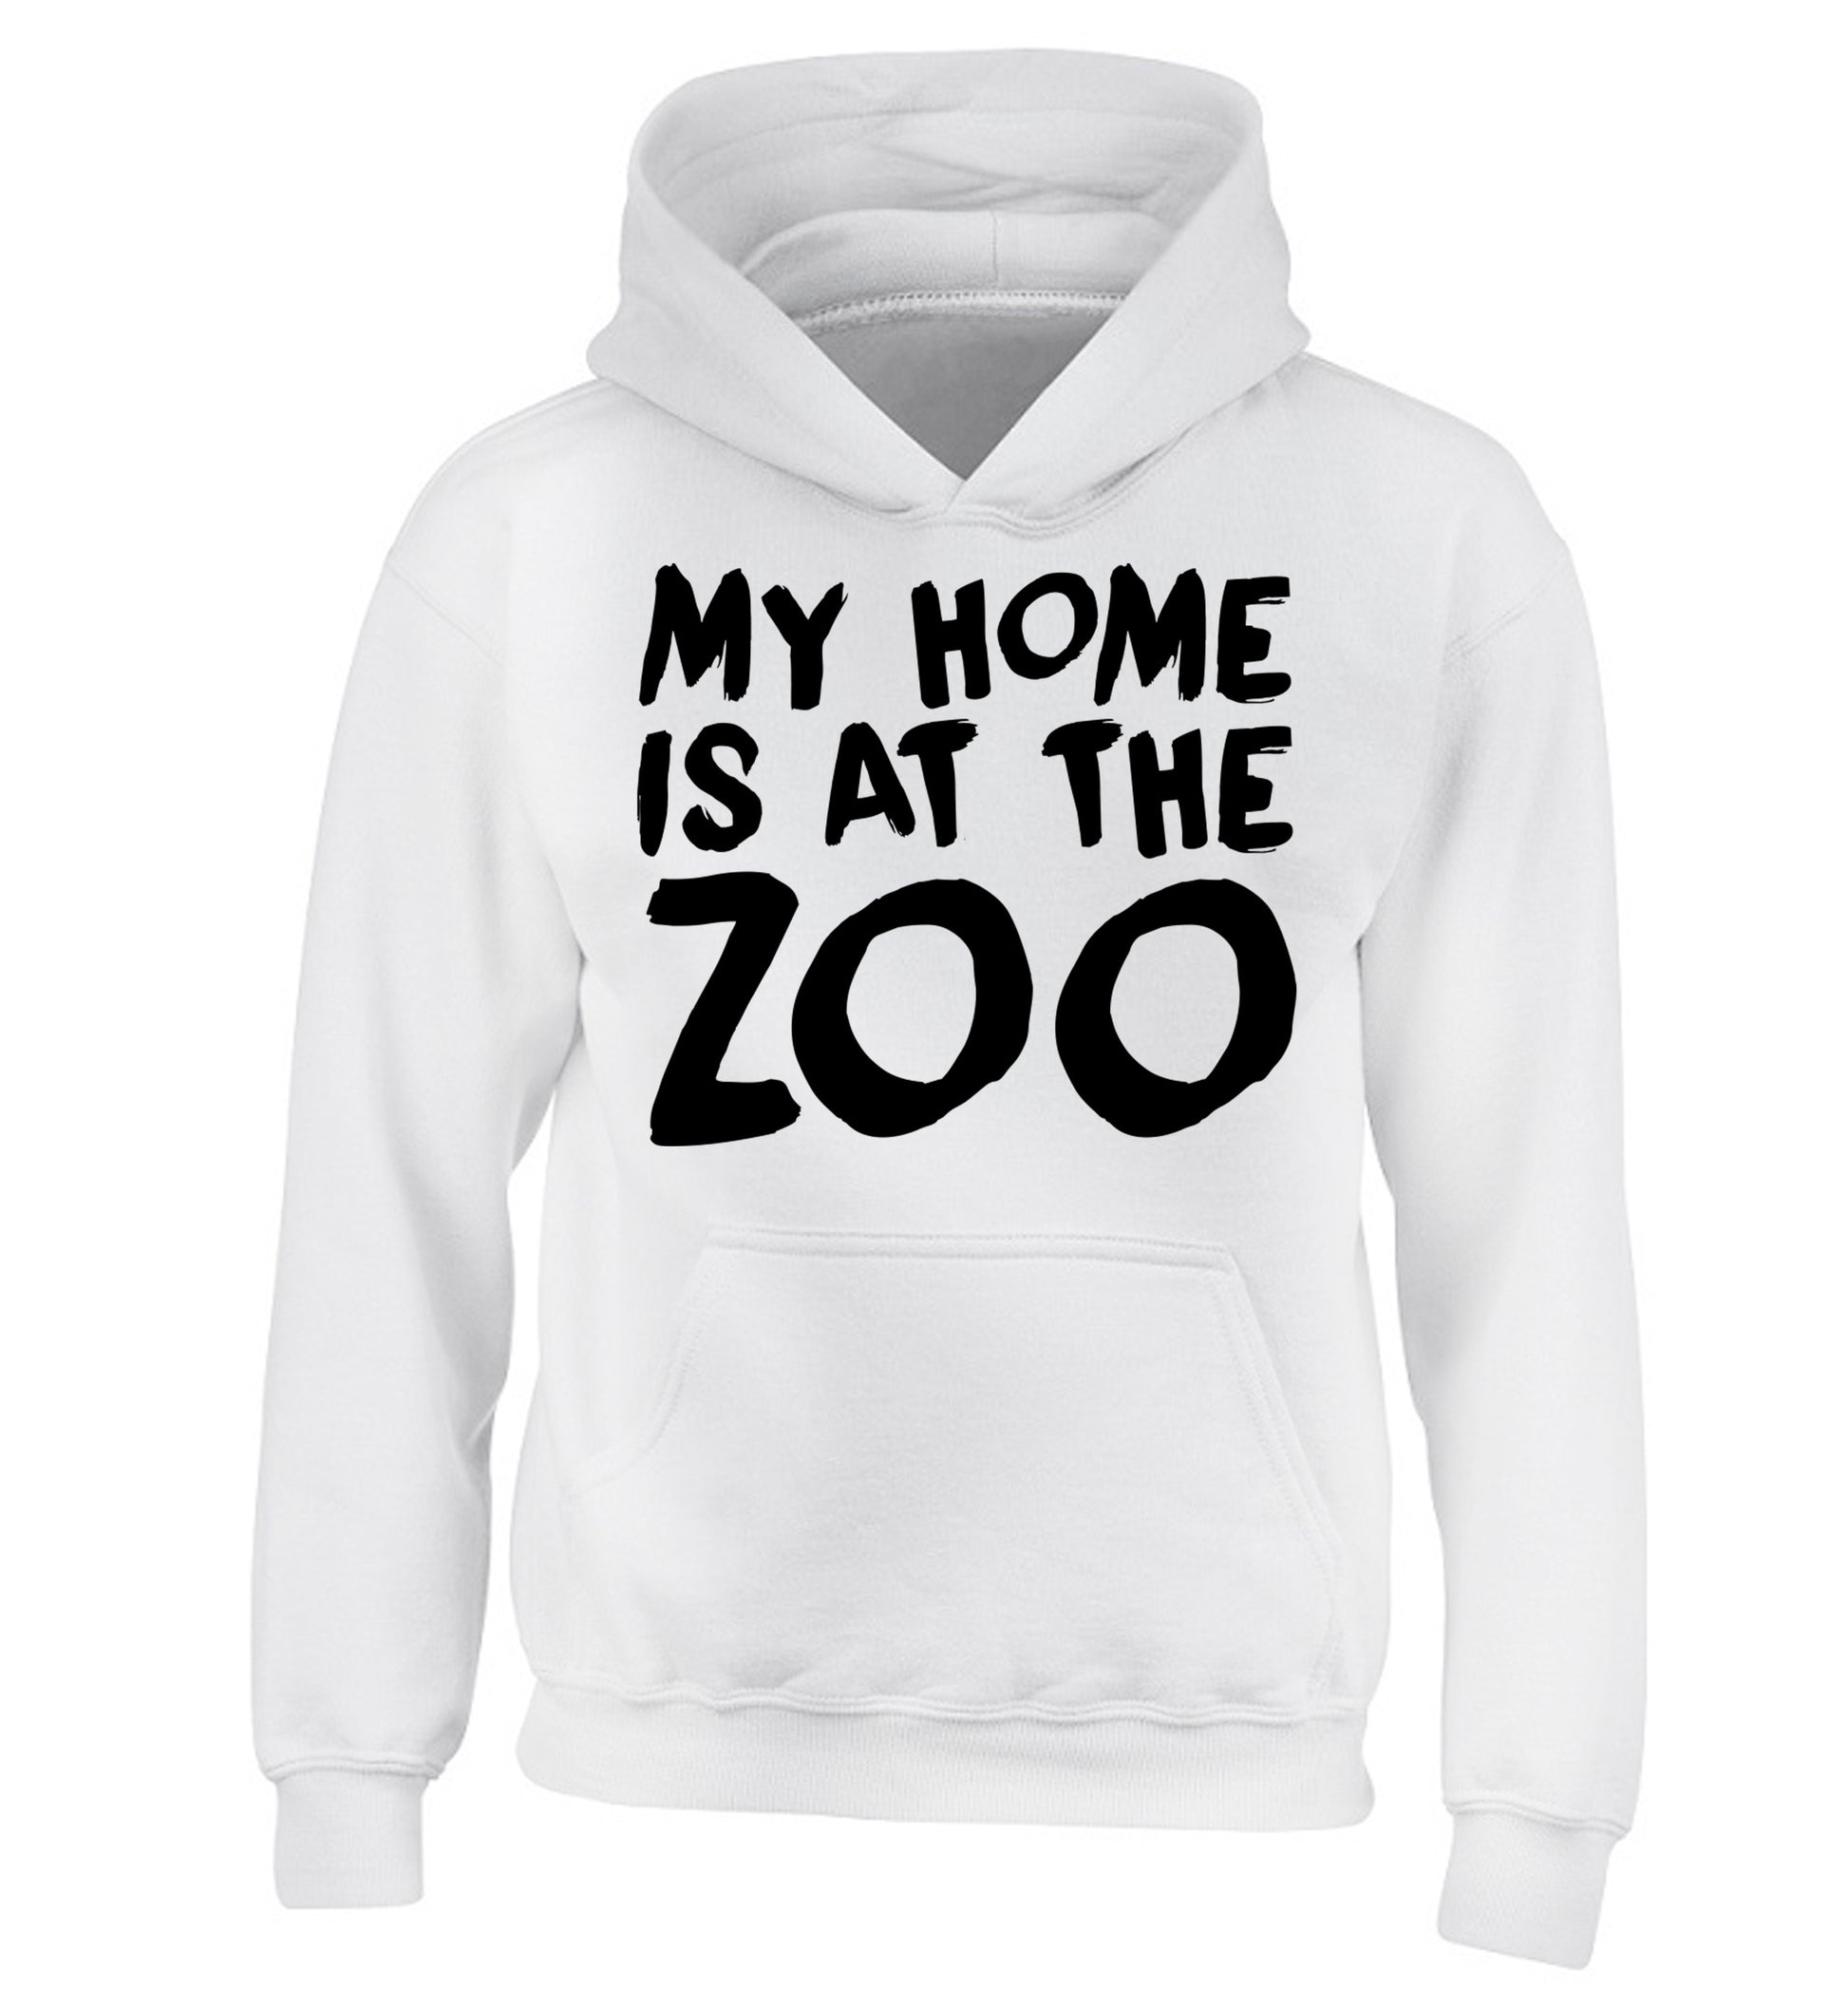 My home is at the zoo children's white hoodie 12-14 Years